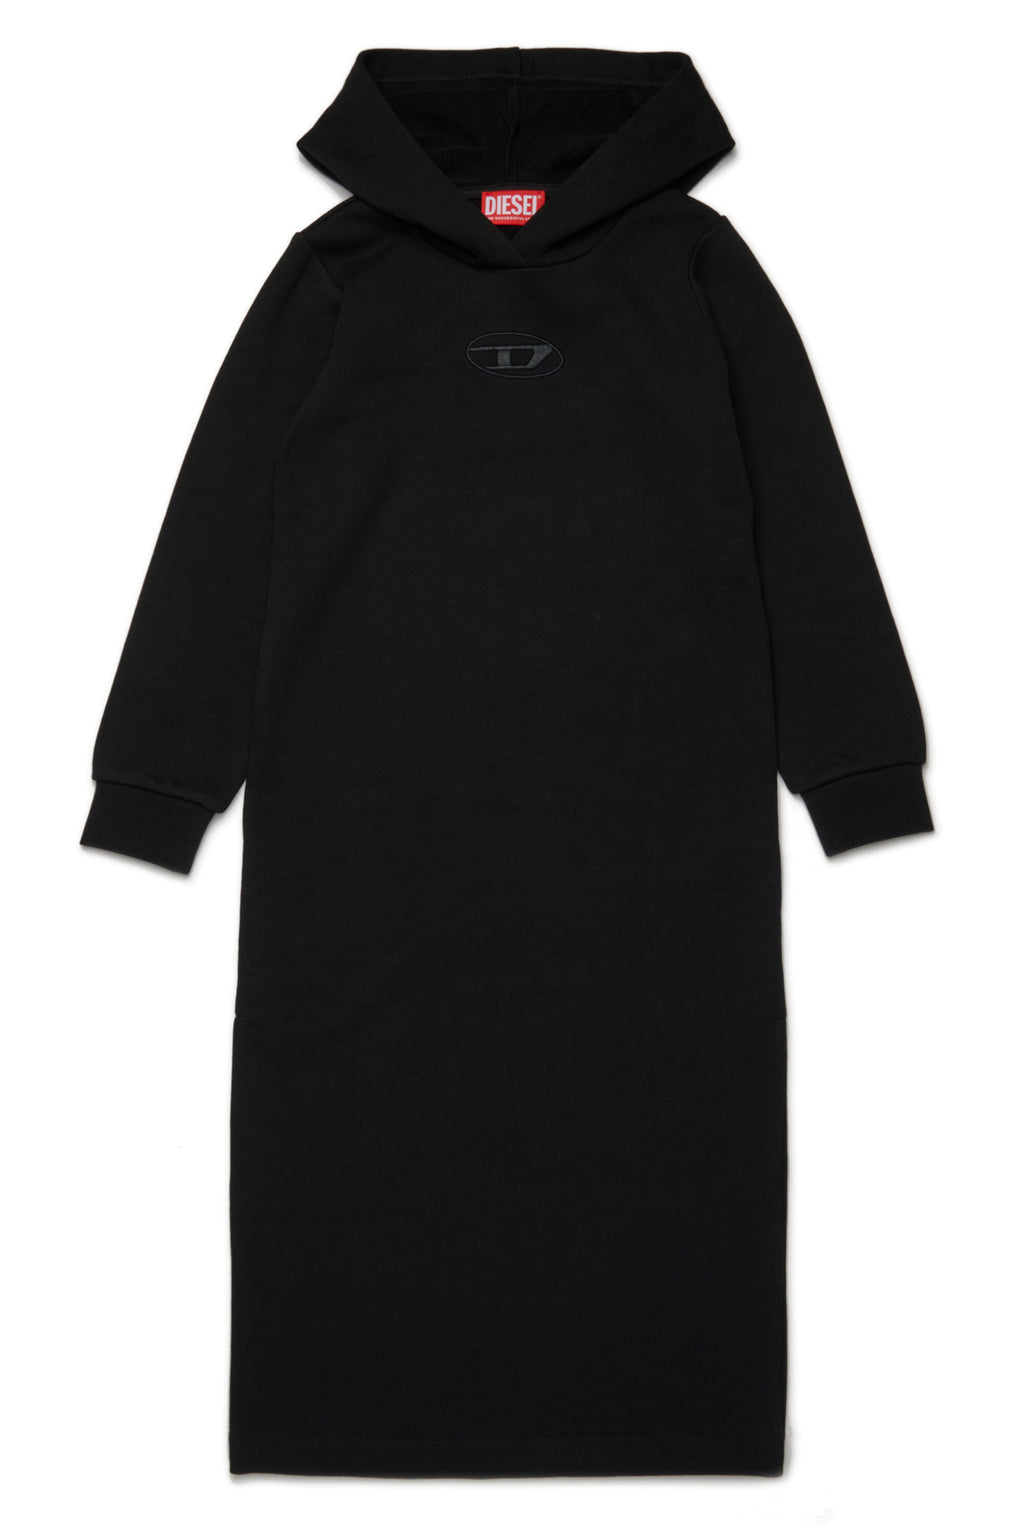 Maxi sweatshirt dress with embroidered oval D logo